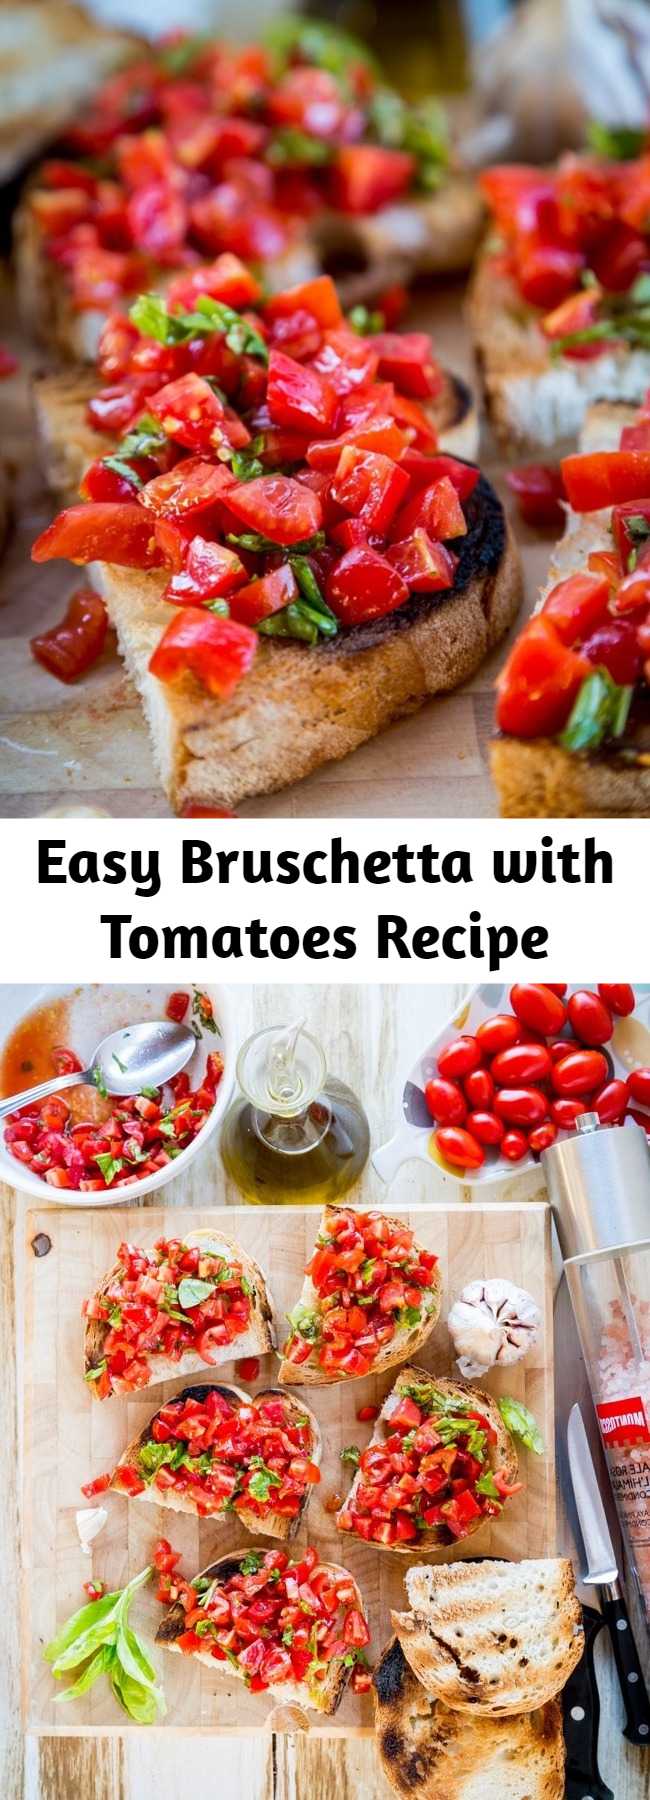 Easy Bruschetta with Tomatoes Recipe - Grilling in summer is best accompanied with the basic bruschetta al pomodoro. Having this to start the meal can be dangerously good that you tend to eat too much and end up not having much space anymore for the rest of the courses.